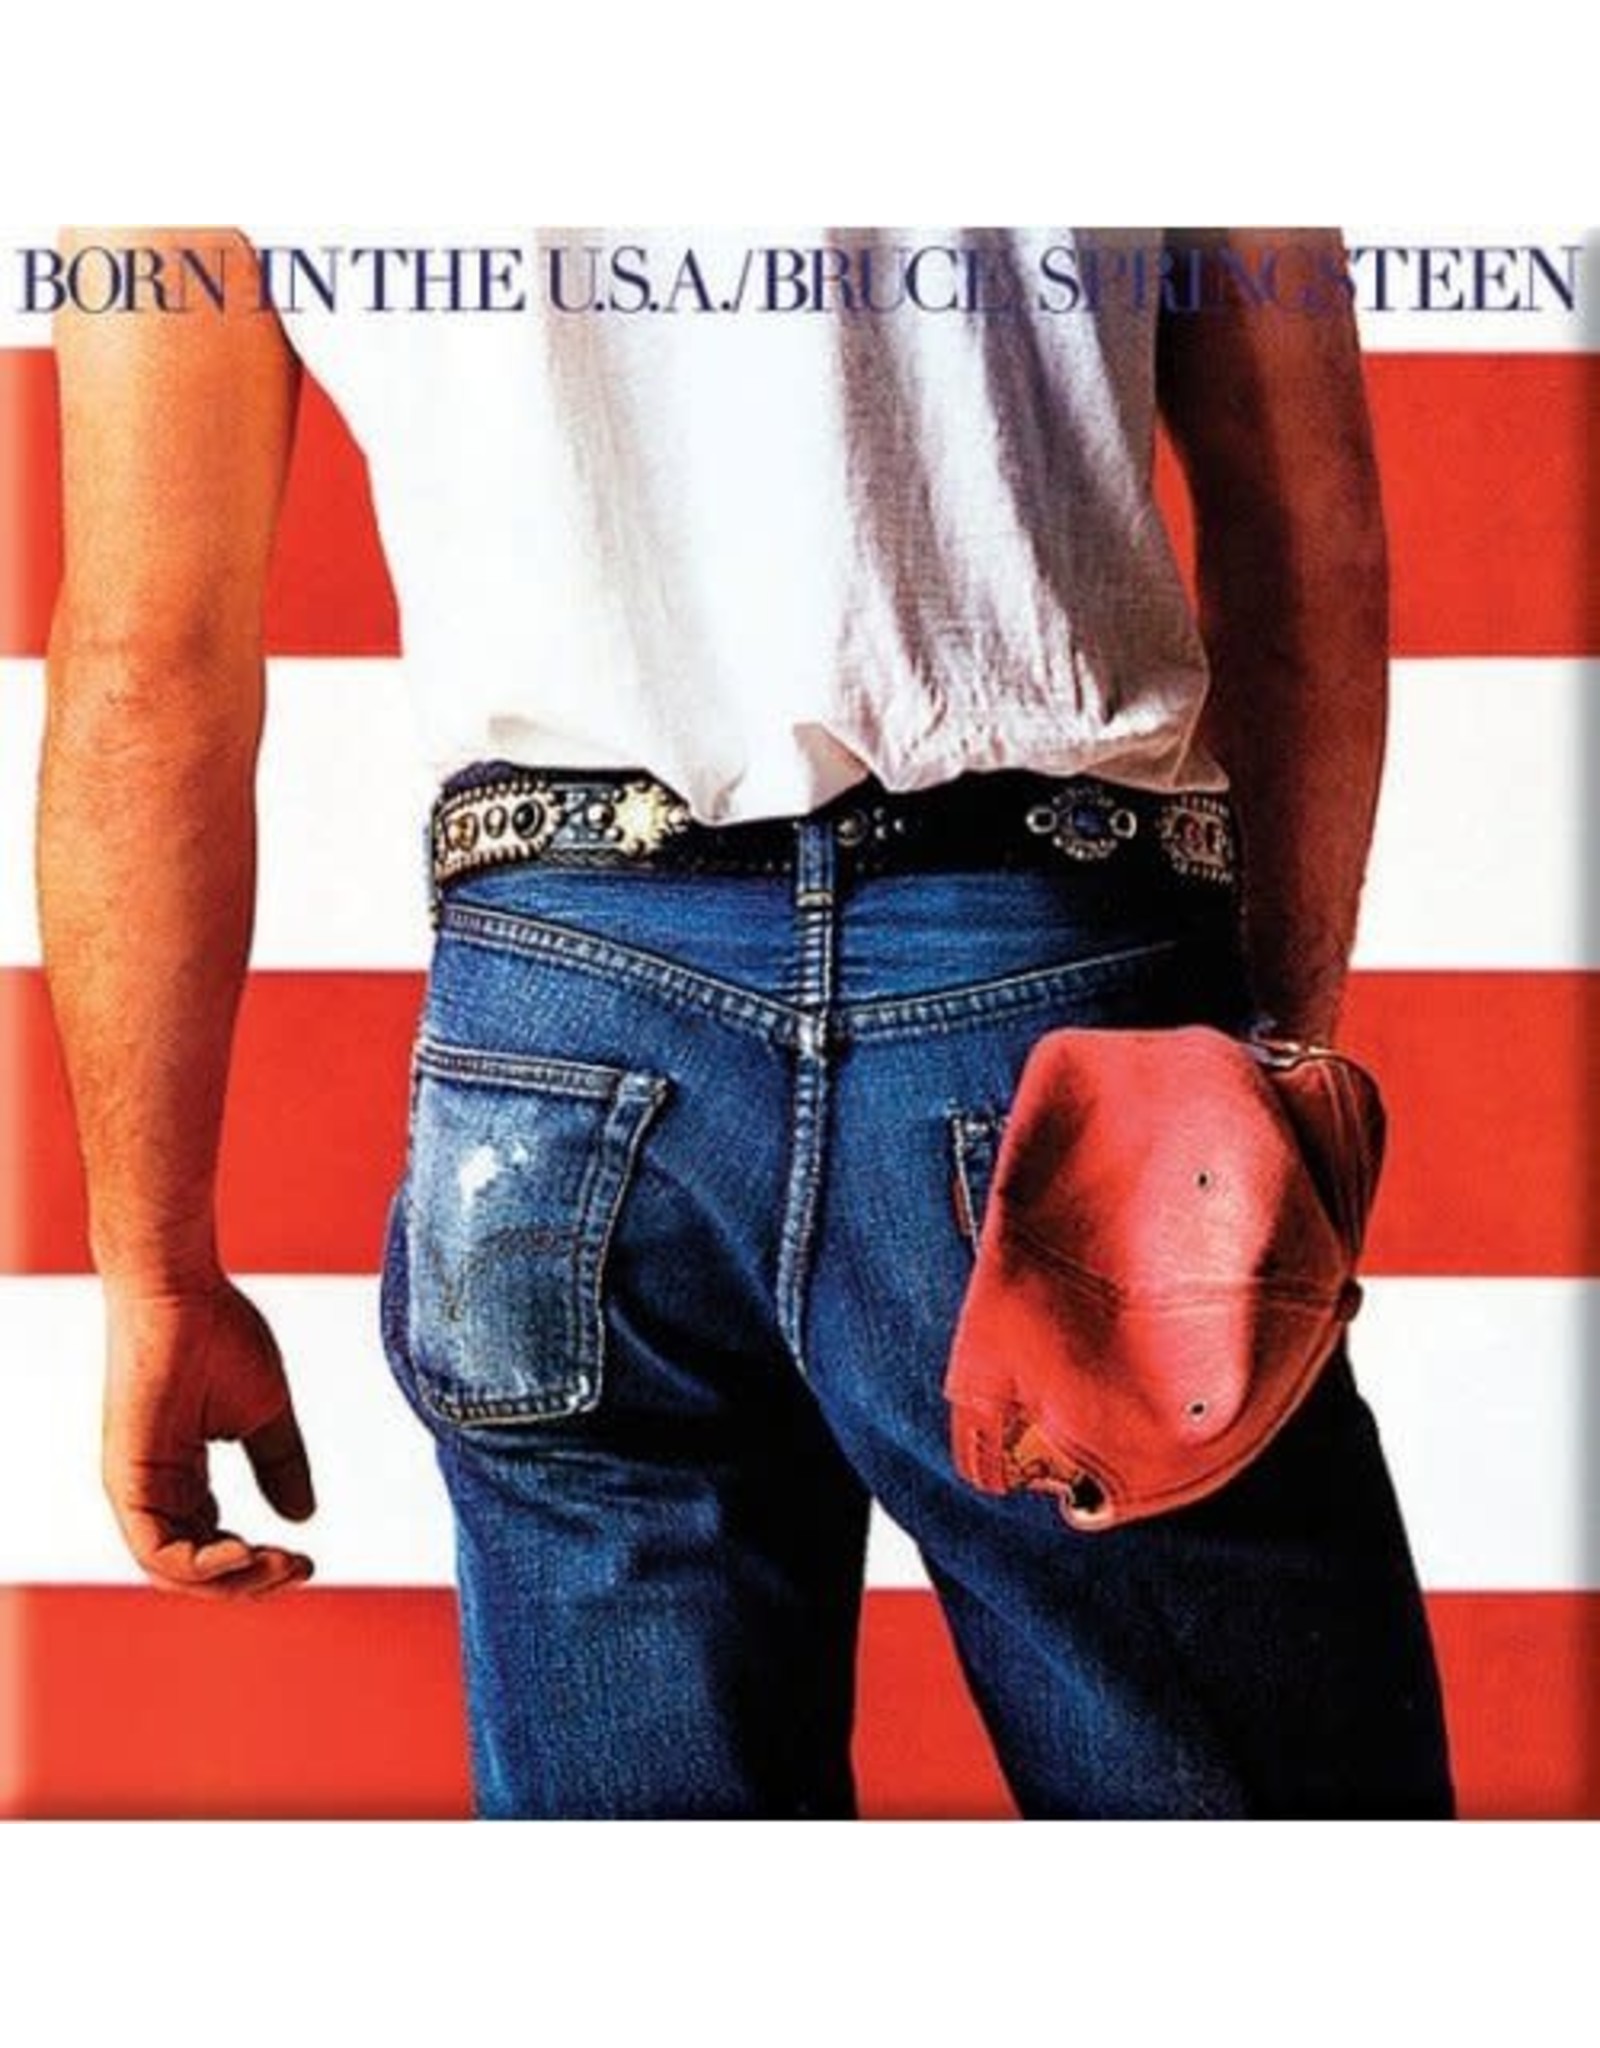 Bruce Springsteen / Born In The USA Magnet